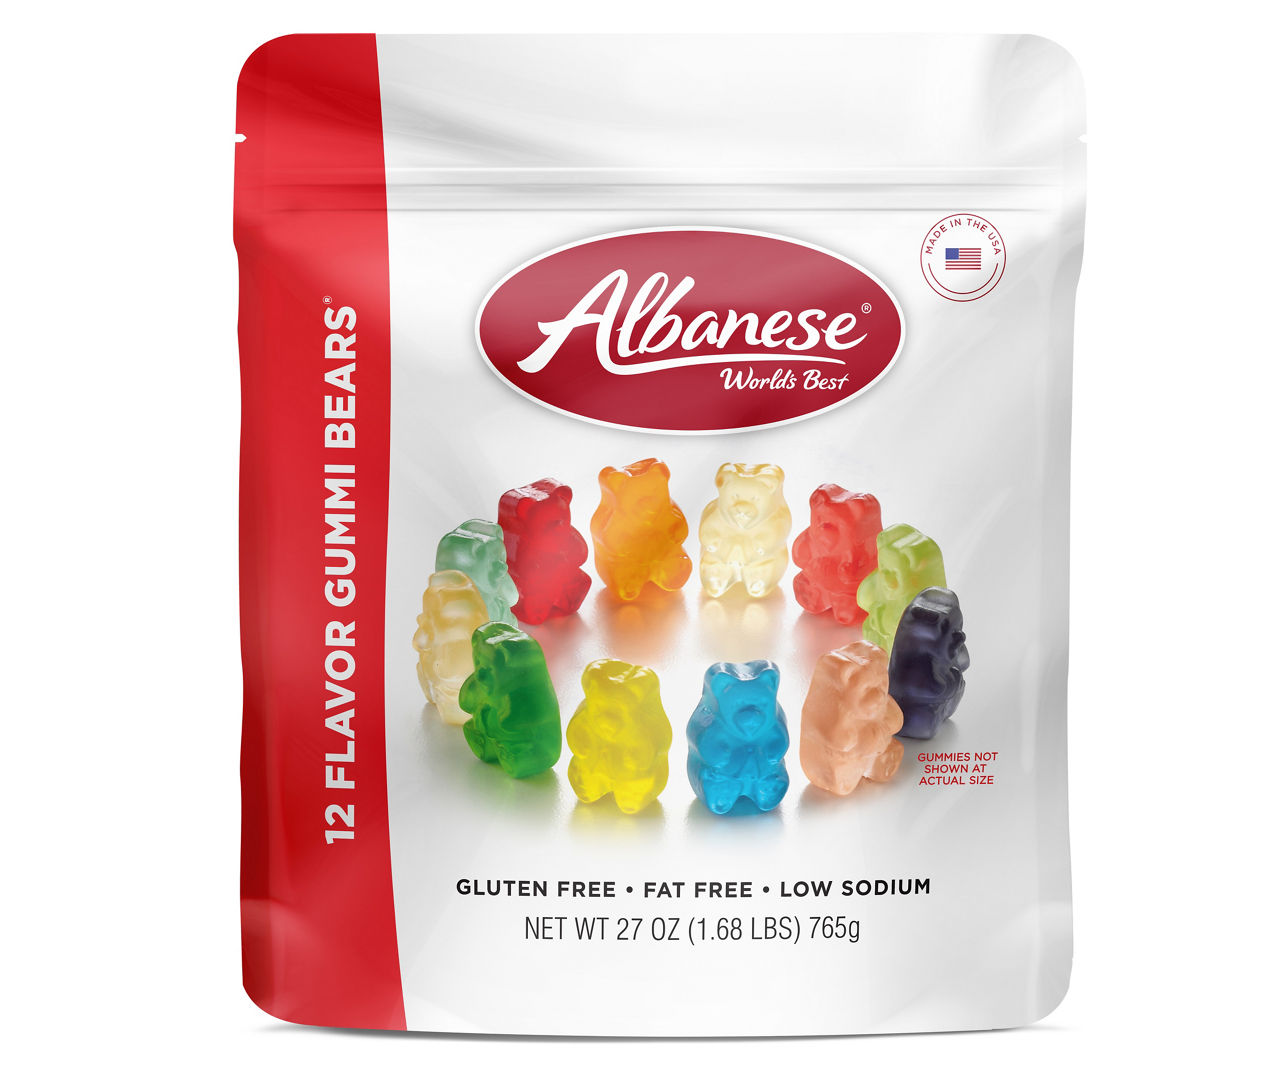 Gummy Bears (12 Flavors) - By the Pound 